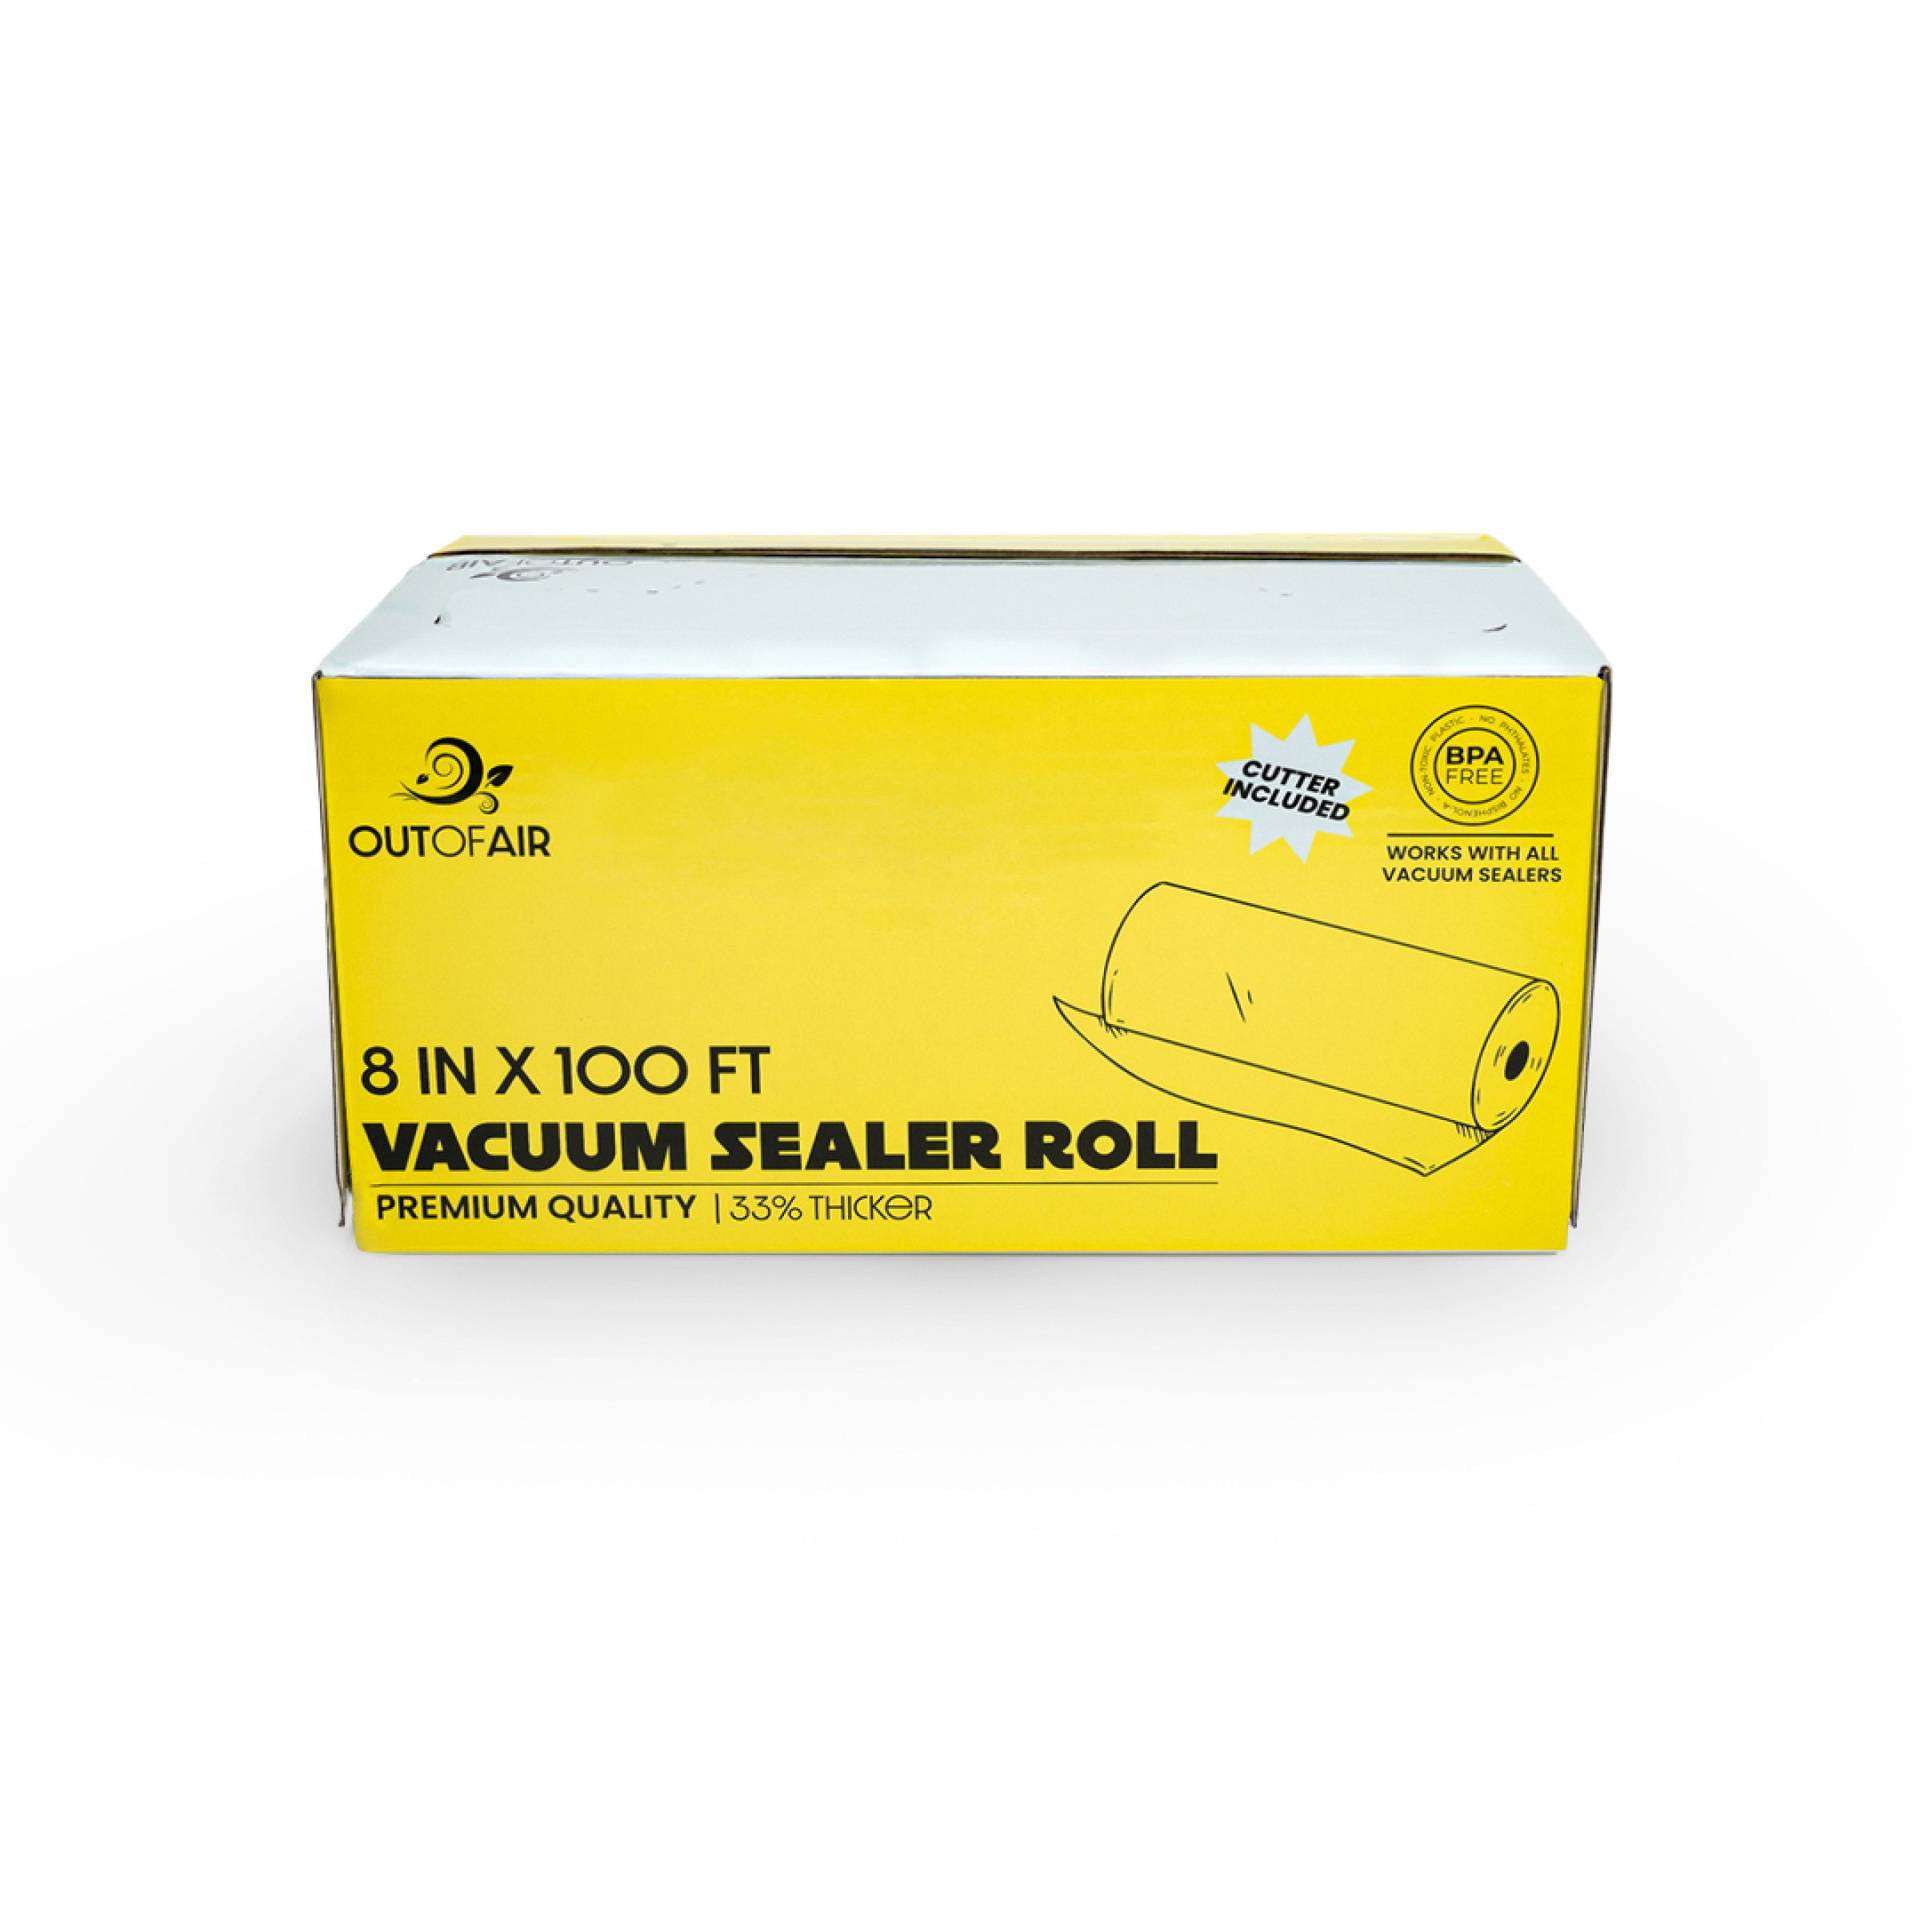 OutOfAir 11 x 100' Vacuum Sealer Bag Roll with Box and Built in Bag Cutter  - 10 Rolls Bulk Case